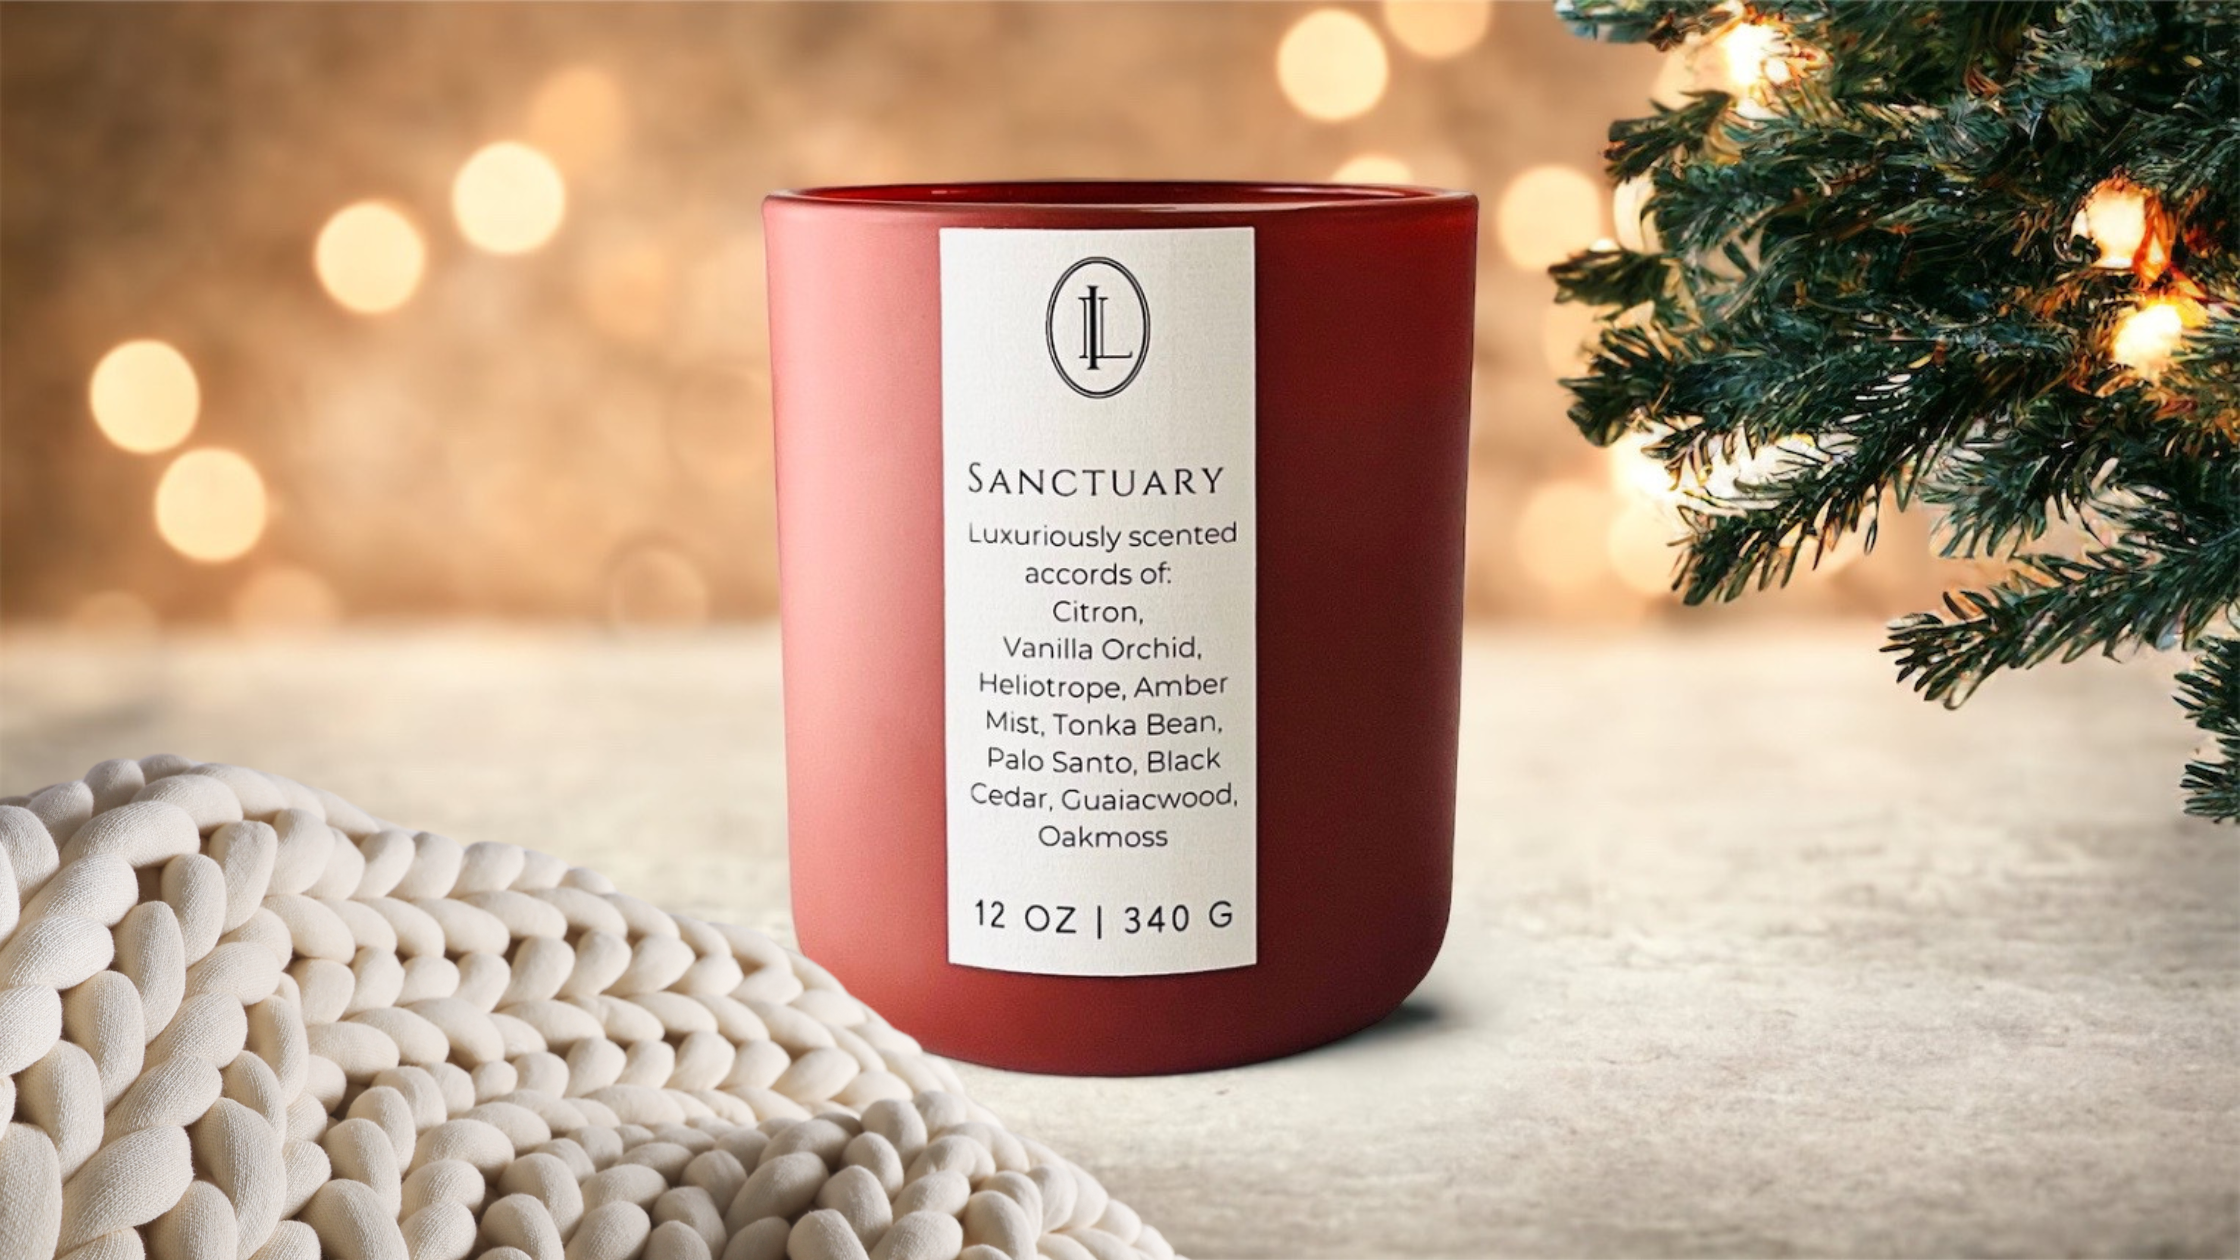 image of Sanctuary candle on Christmas theme background with cream cable knit blanket